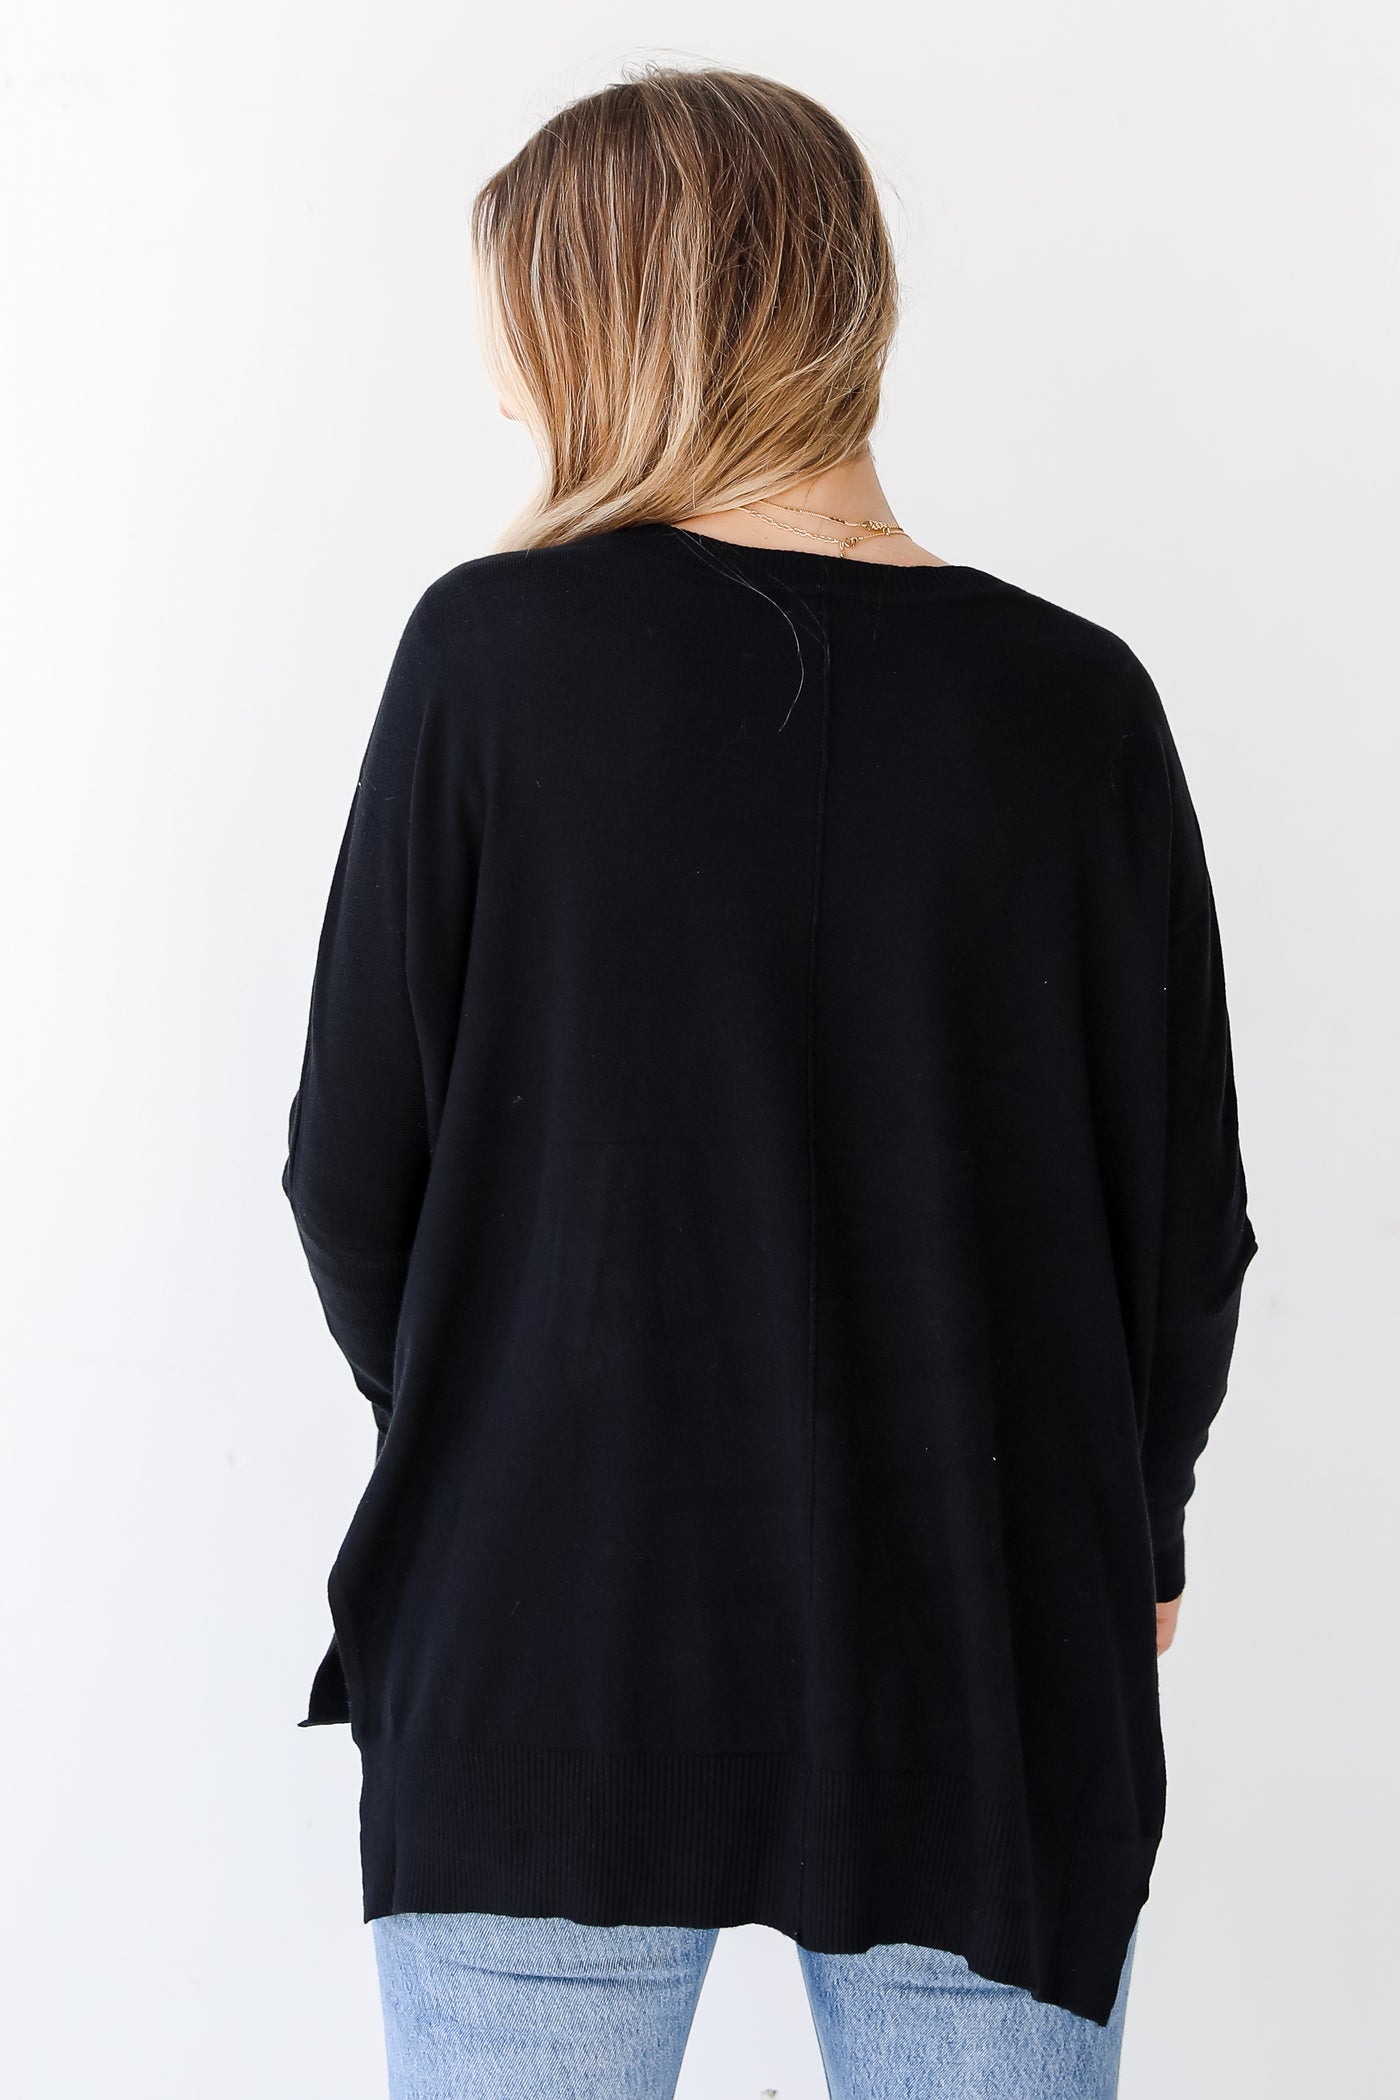 black Sweater back view